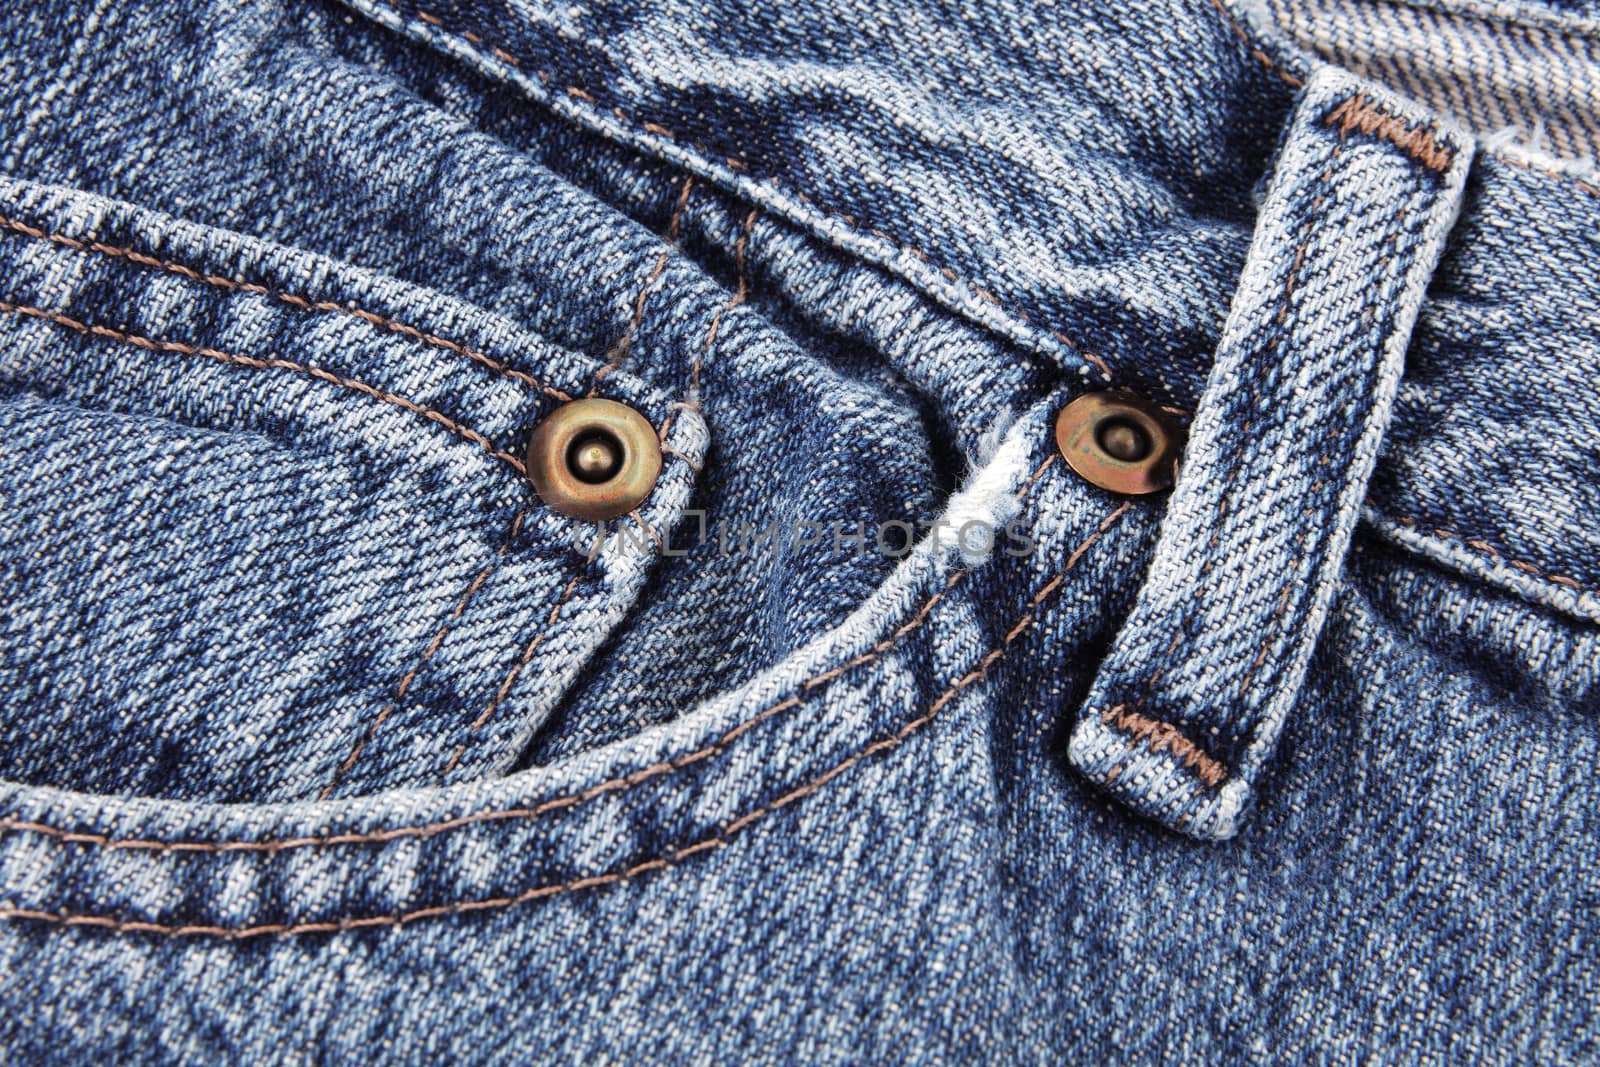 A blue jeans close up detail showing front pocket and waist band and belt loop and studs